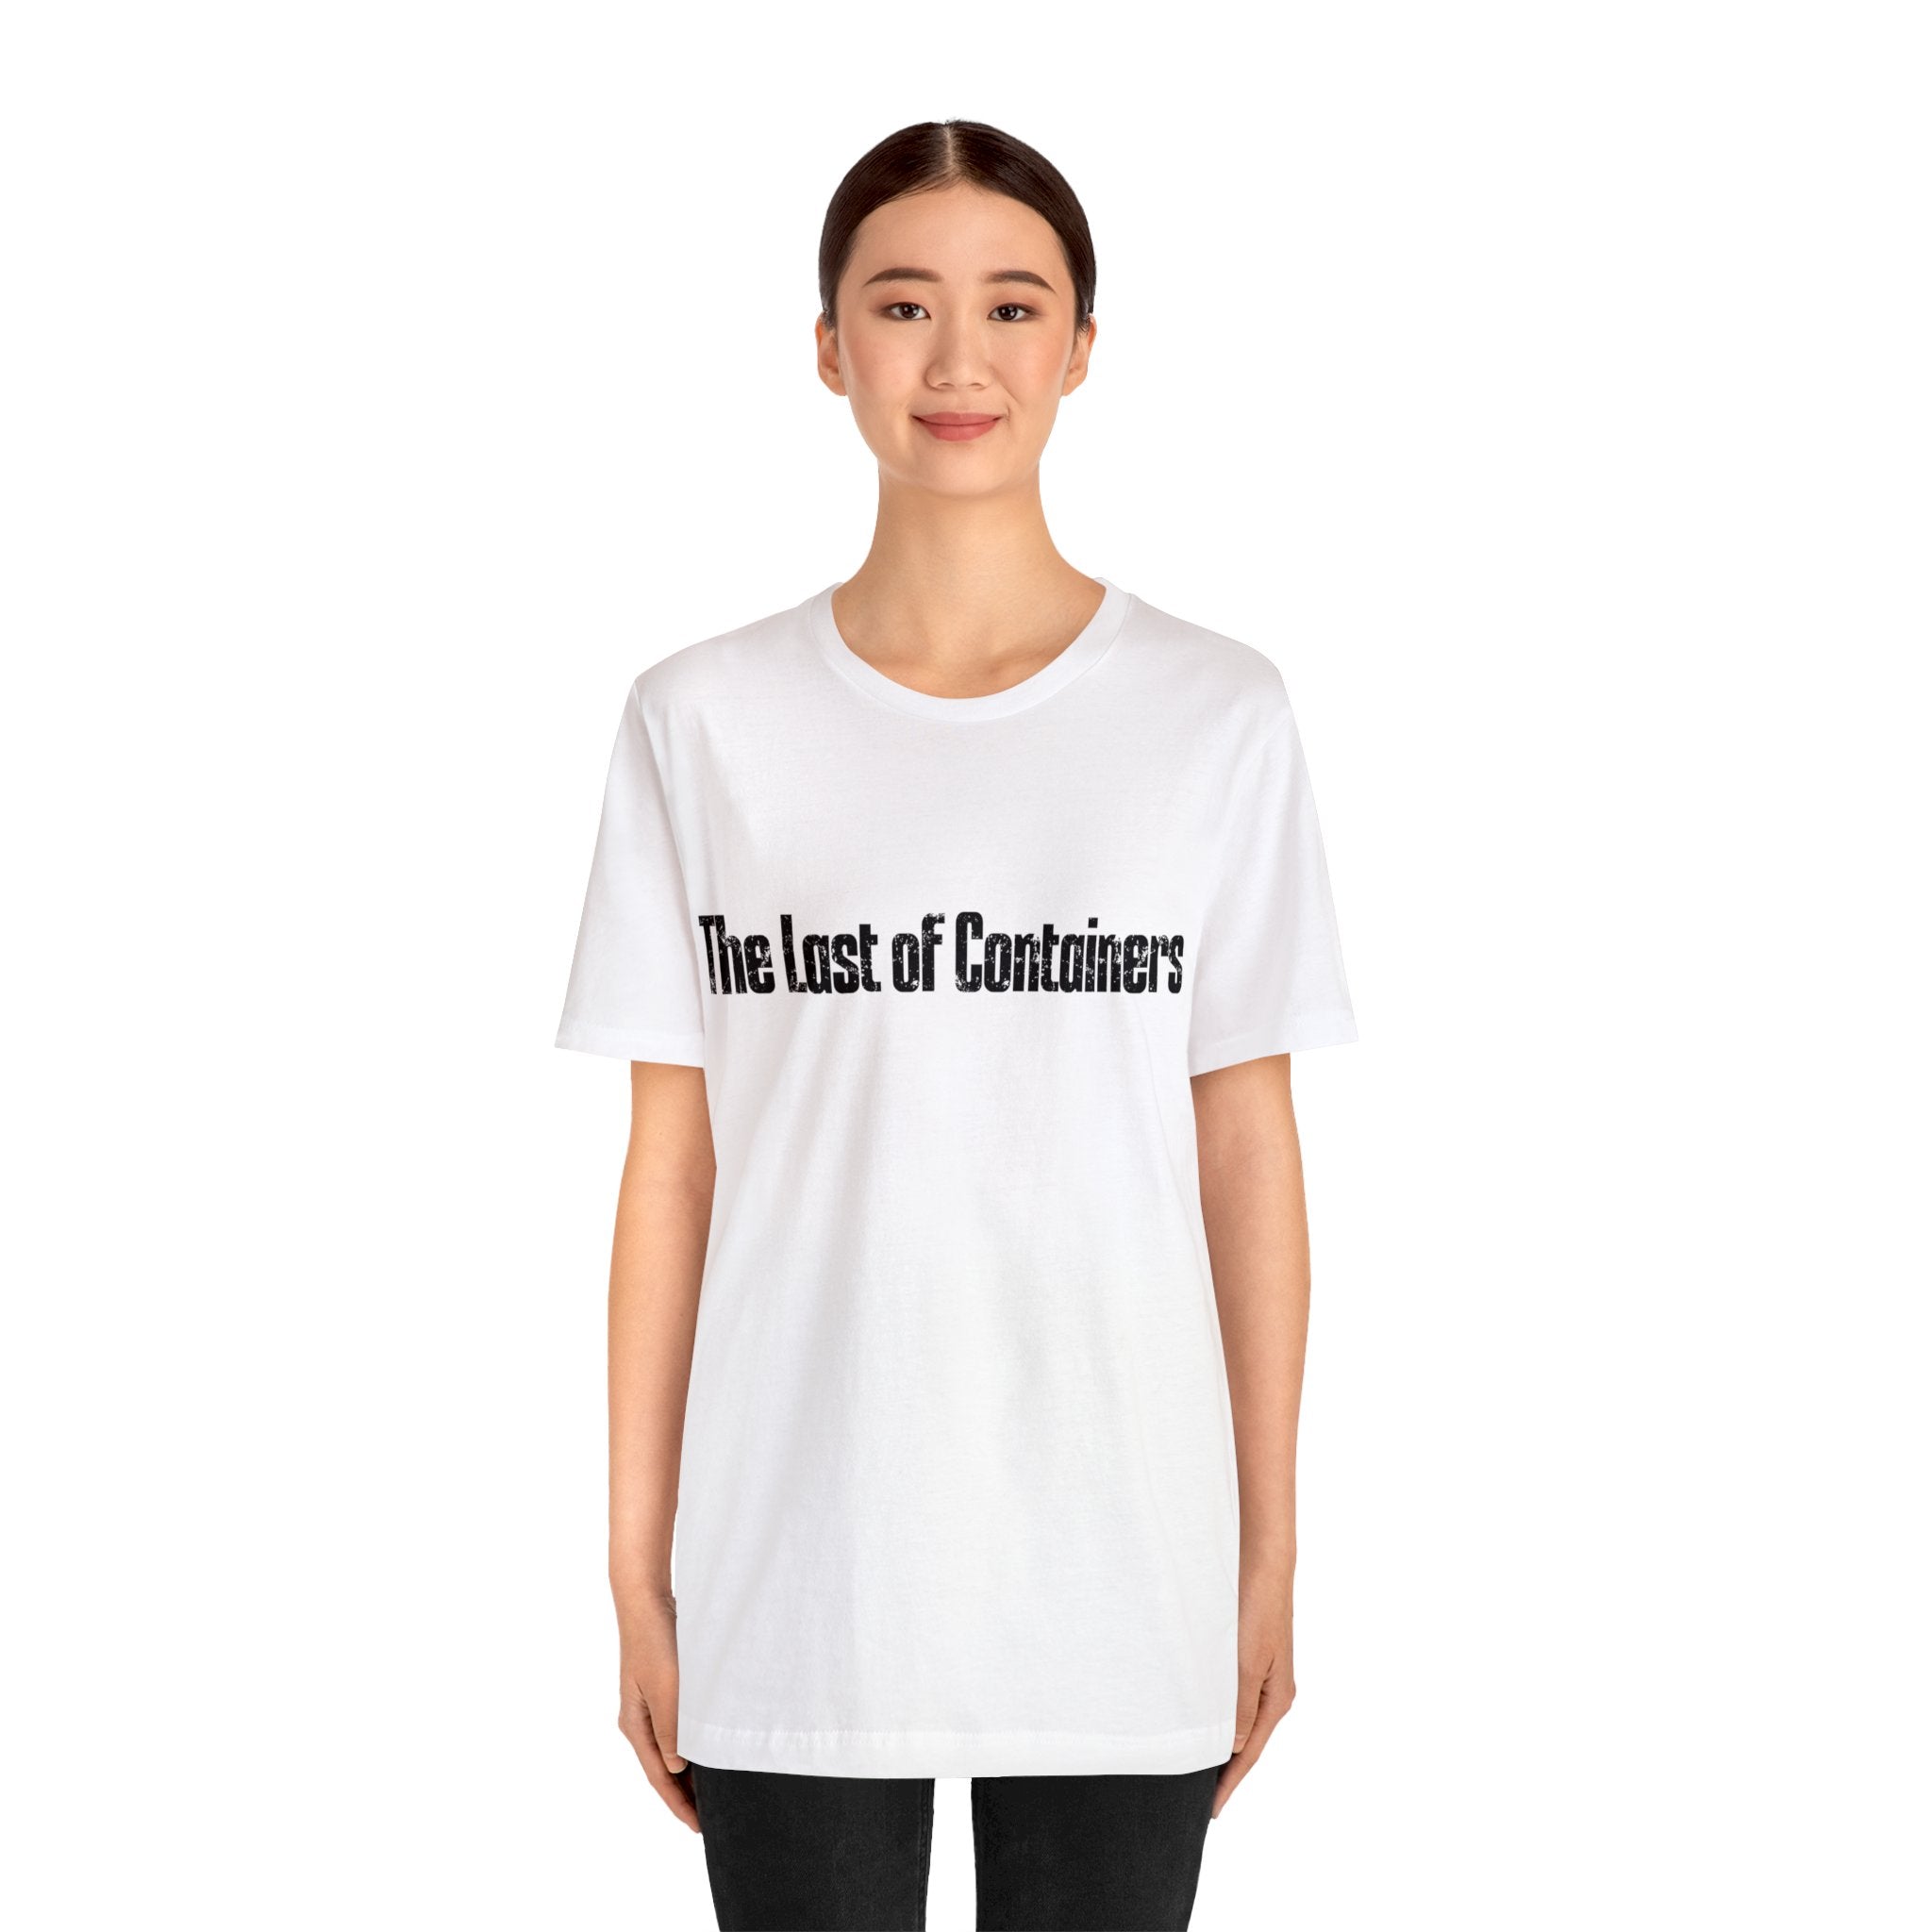 The last of Containers Tee Shirt